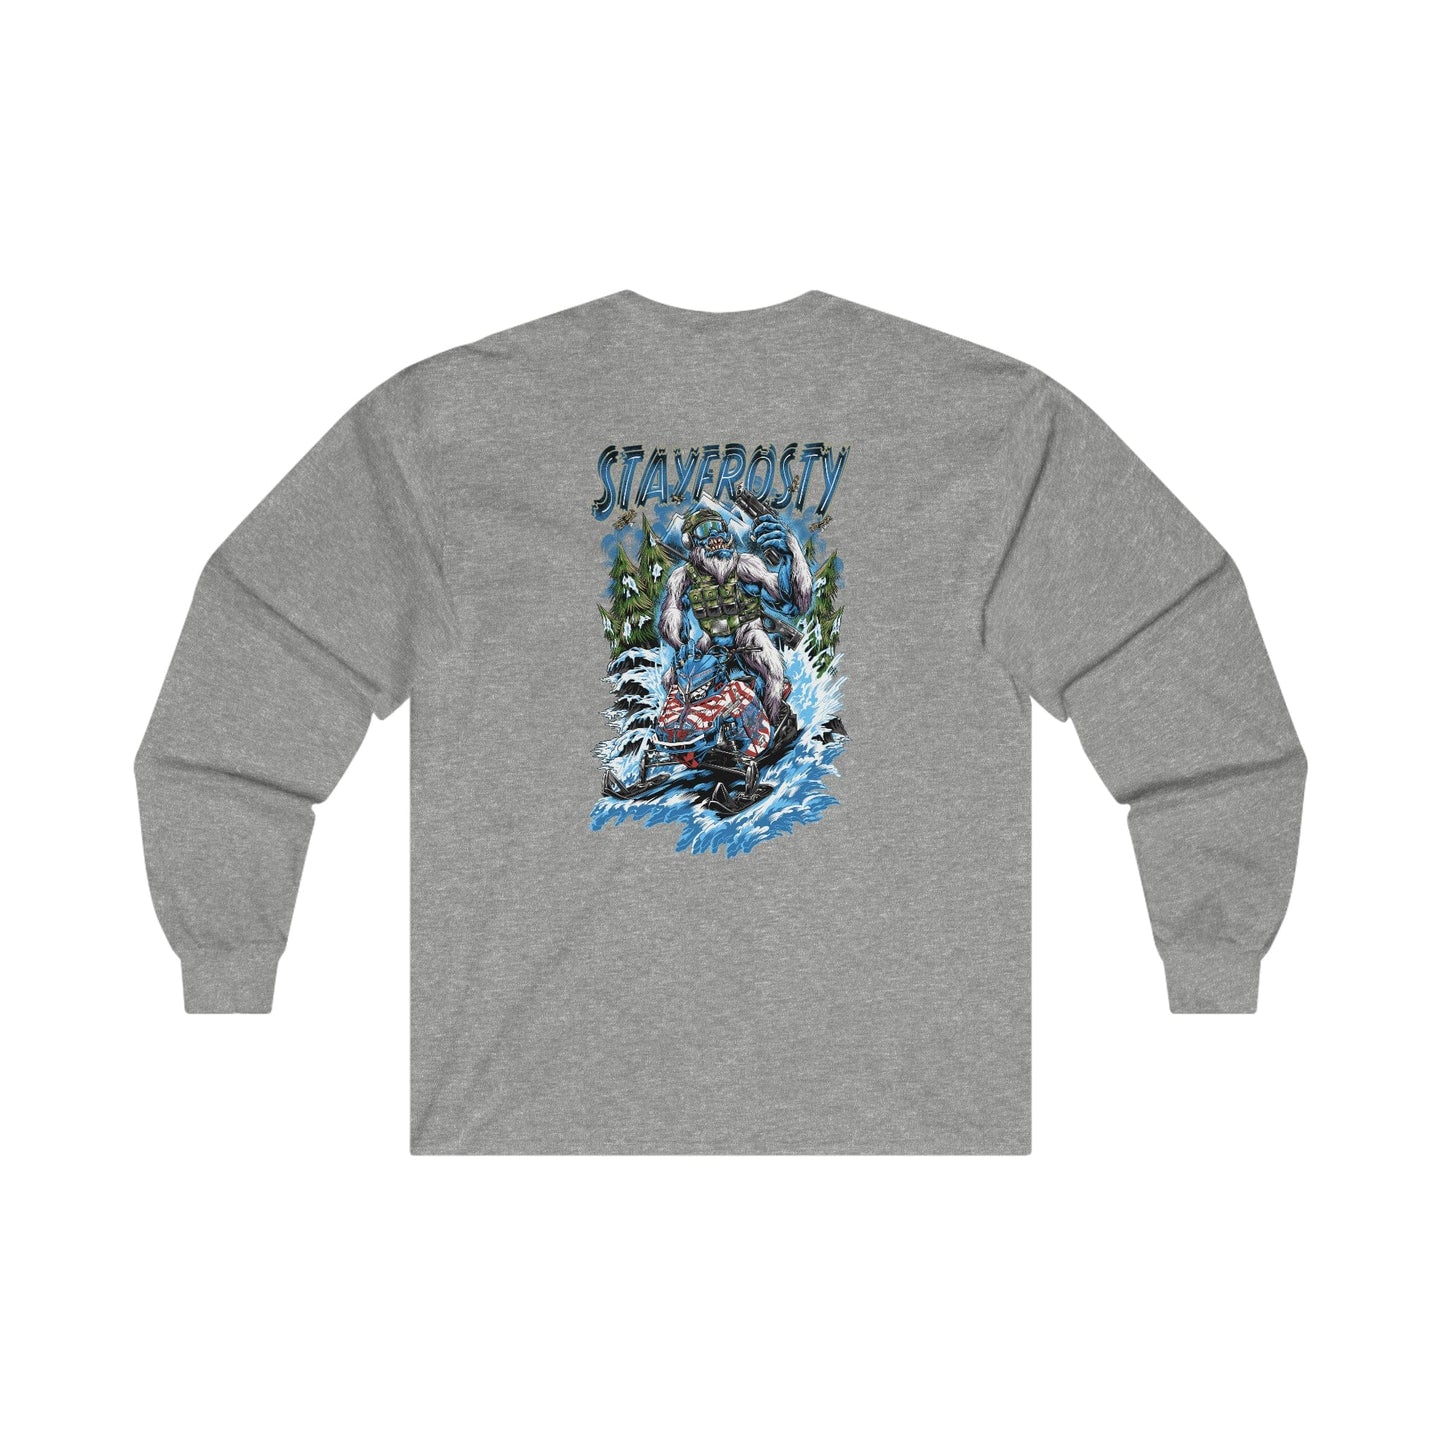 "Stay Frosty" AAHF/HC Collaboration Long Sleeve